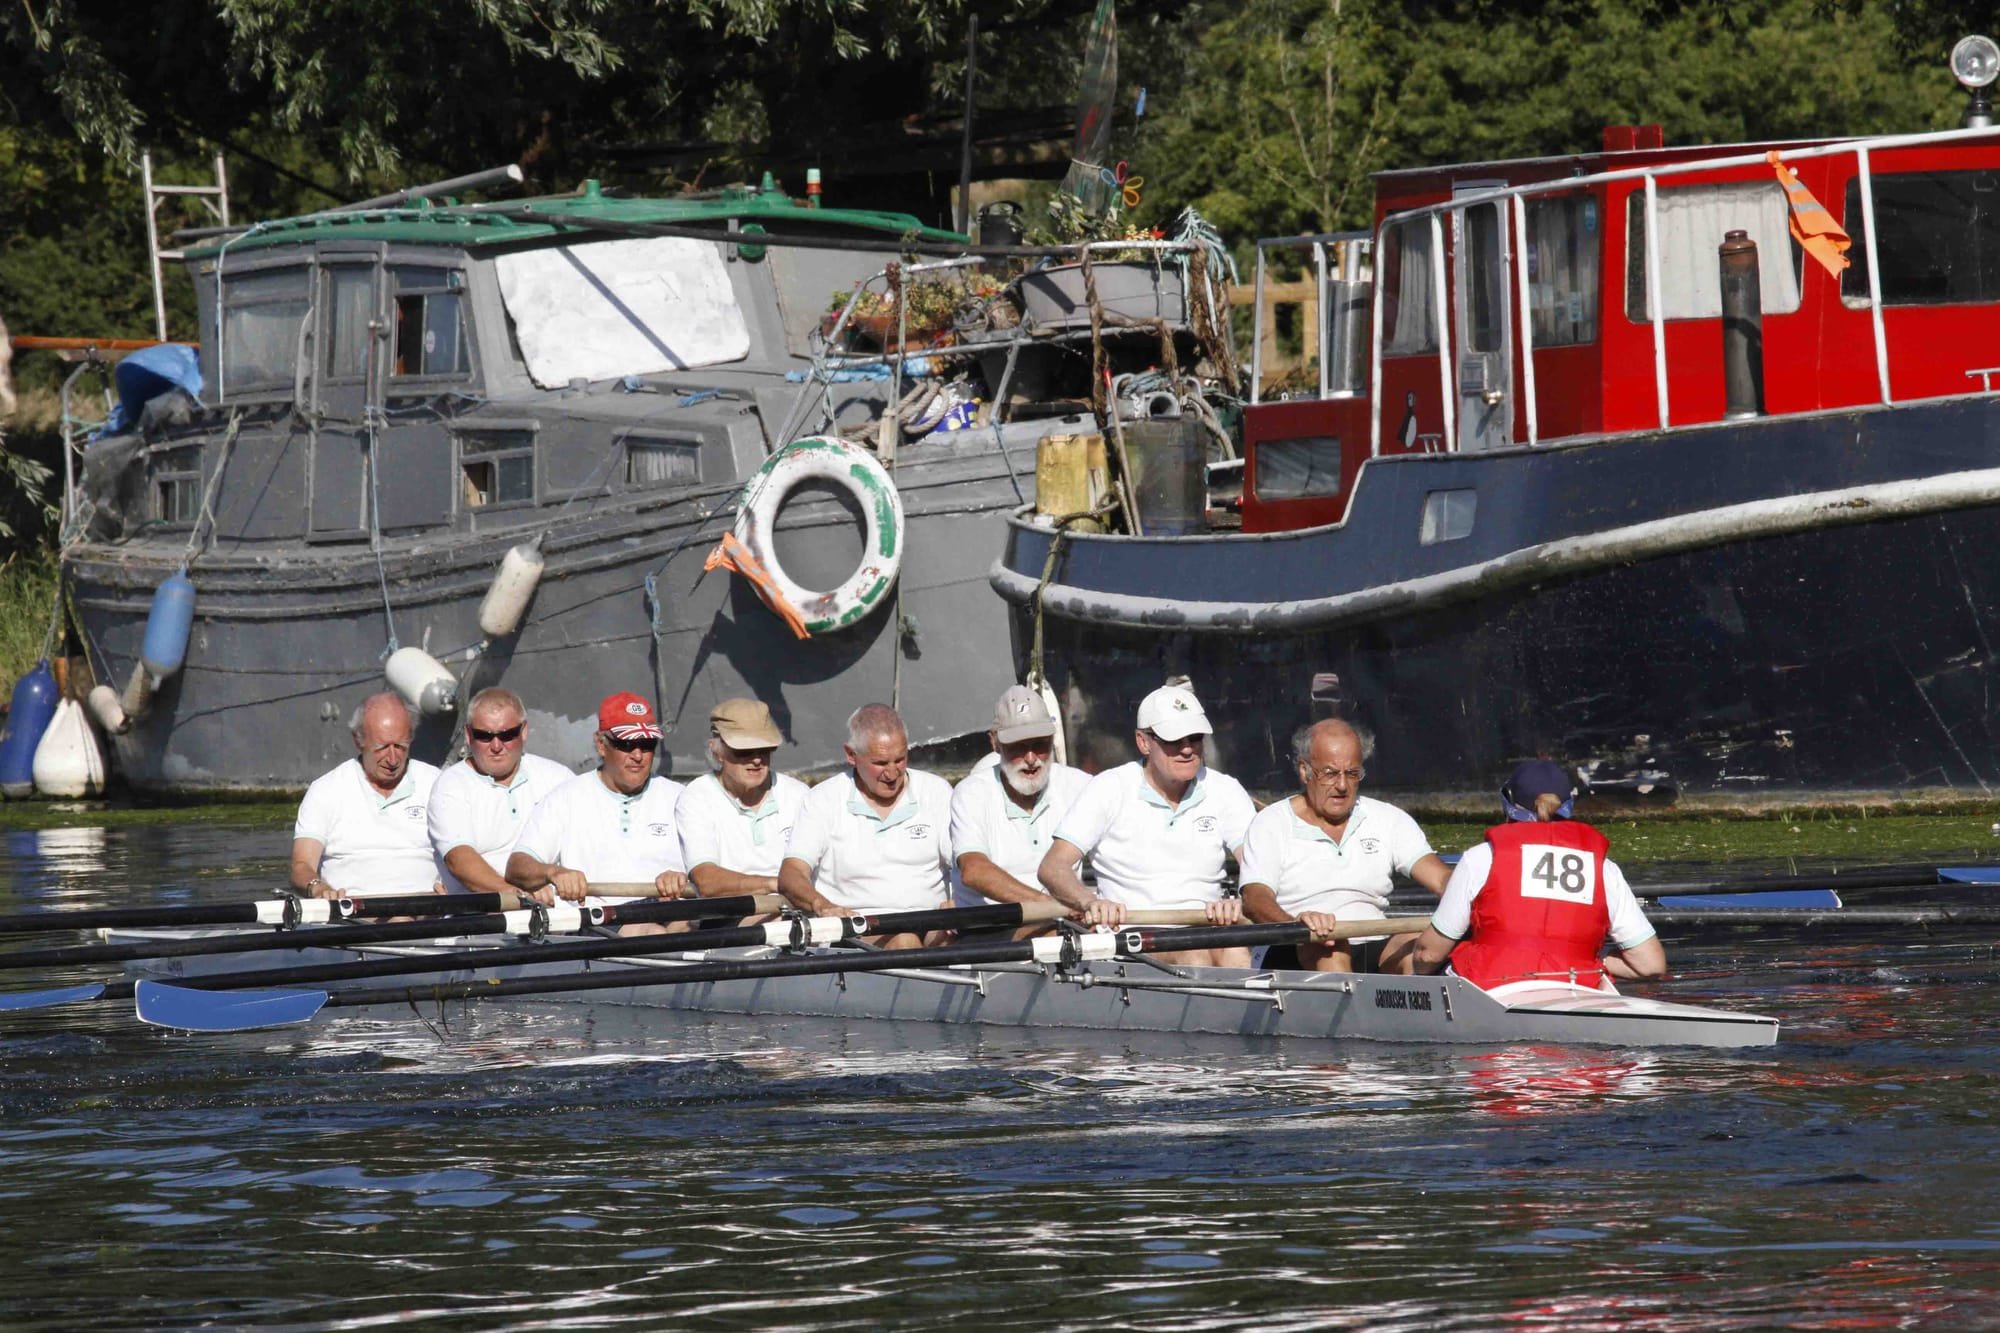 The Veterans team row down to the start